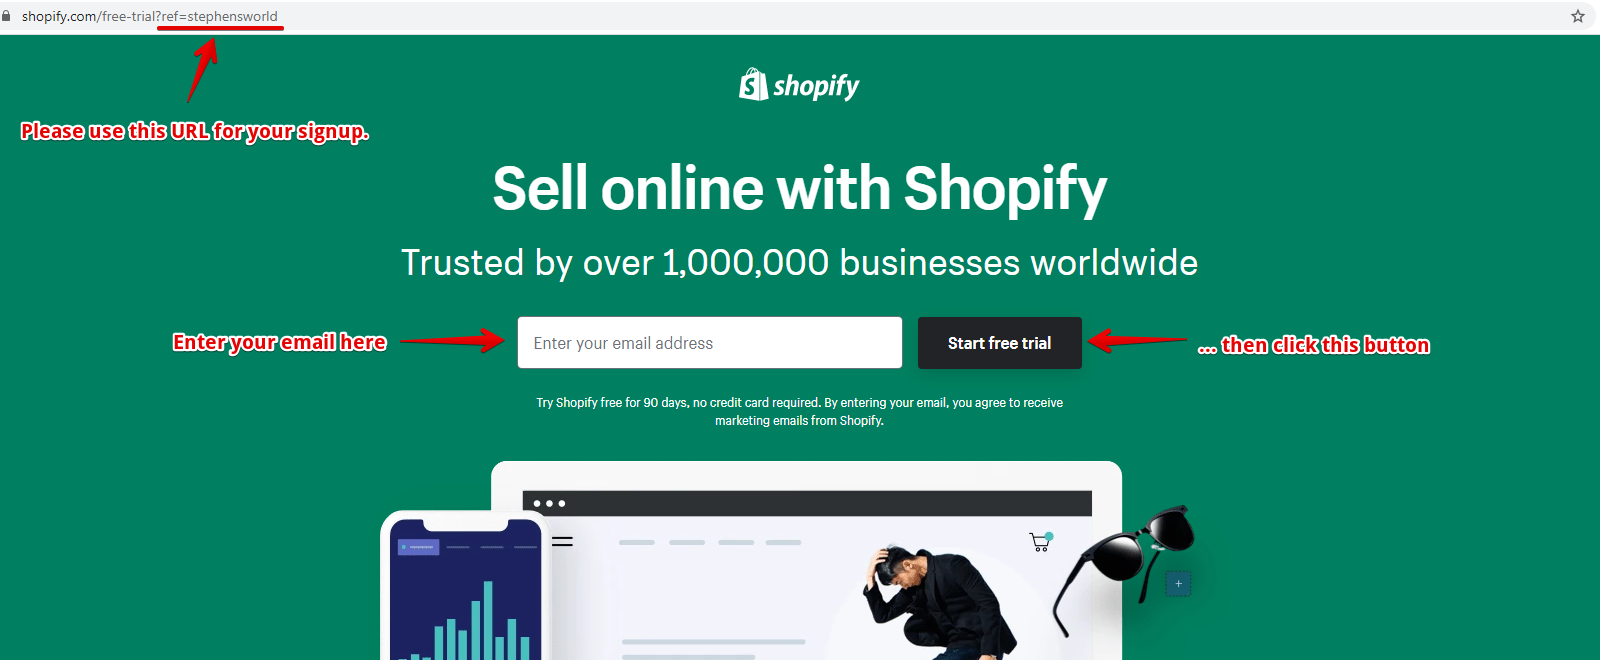 Step 1: Signup for a Shopify Account